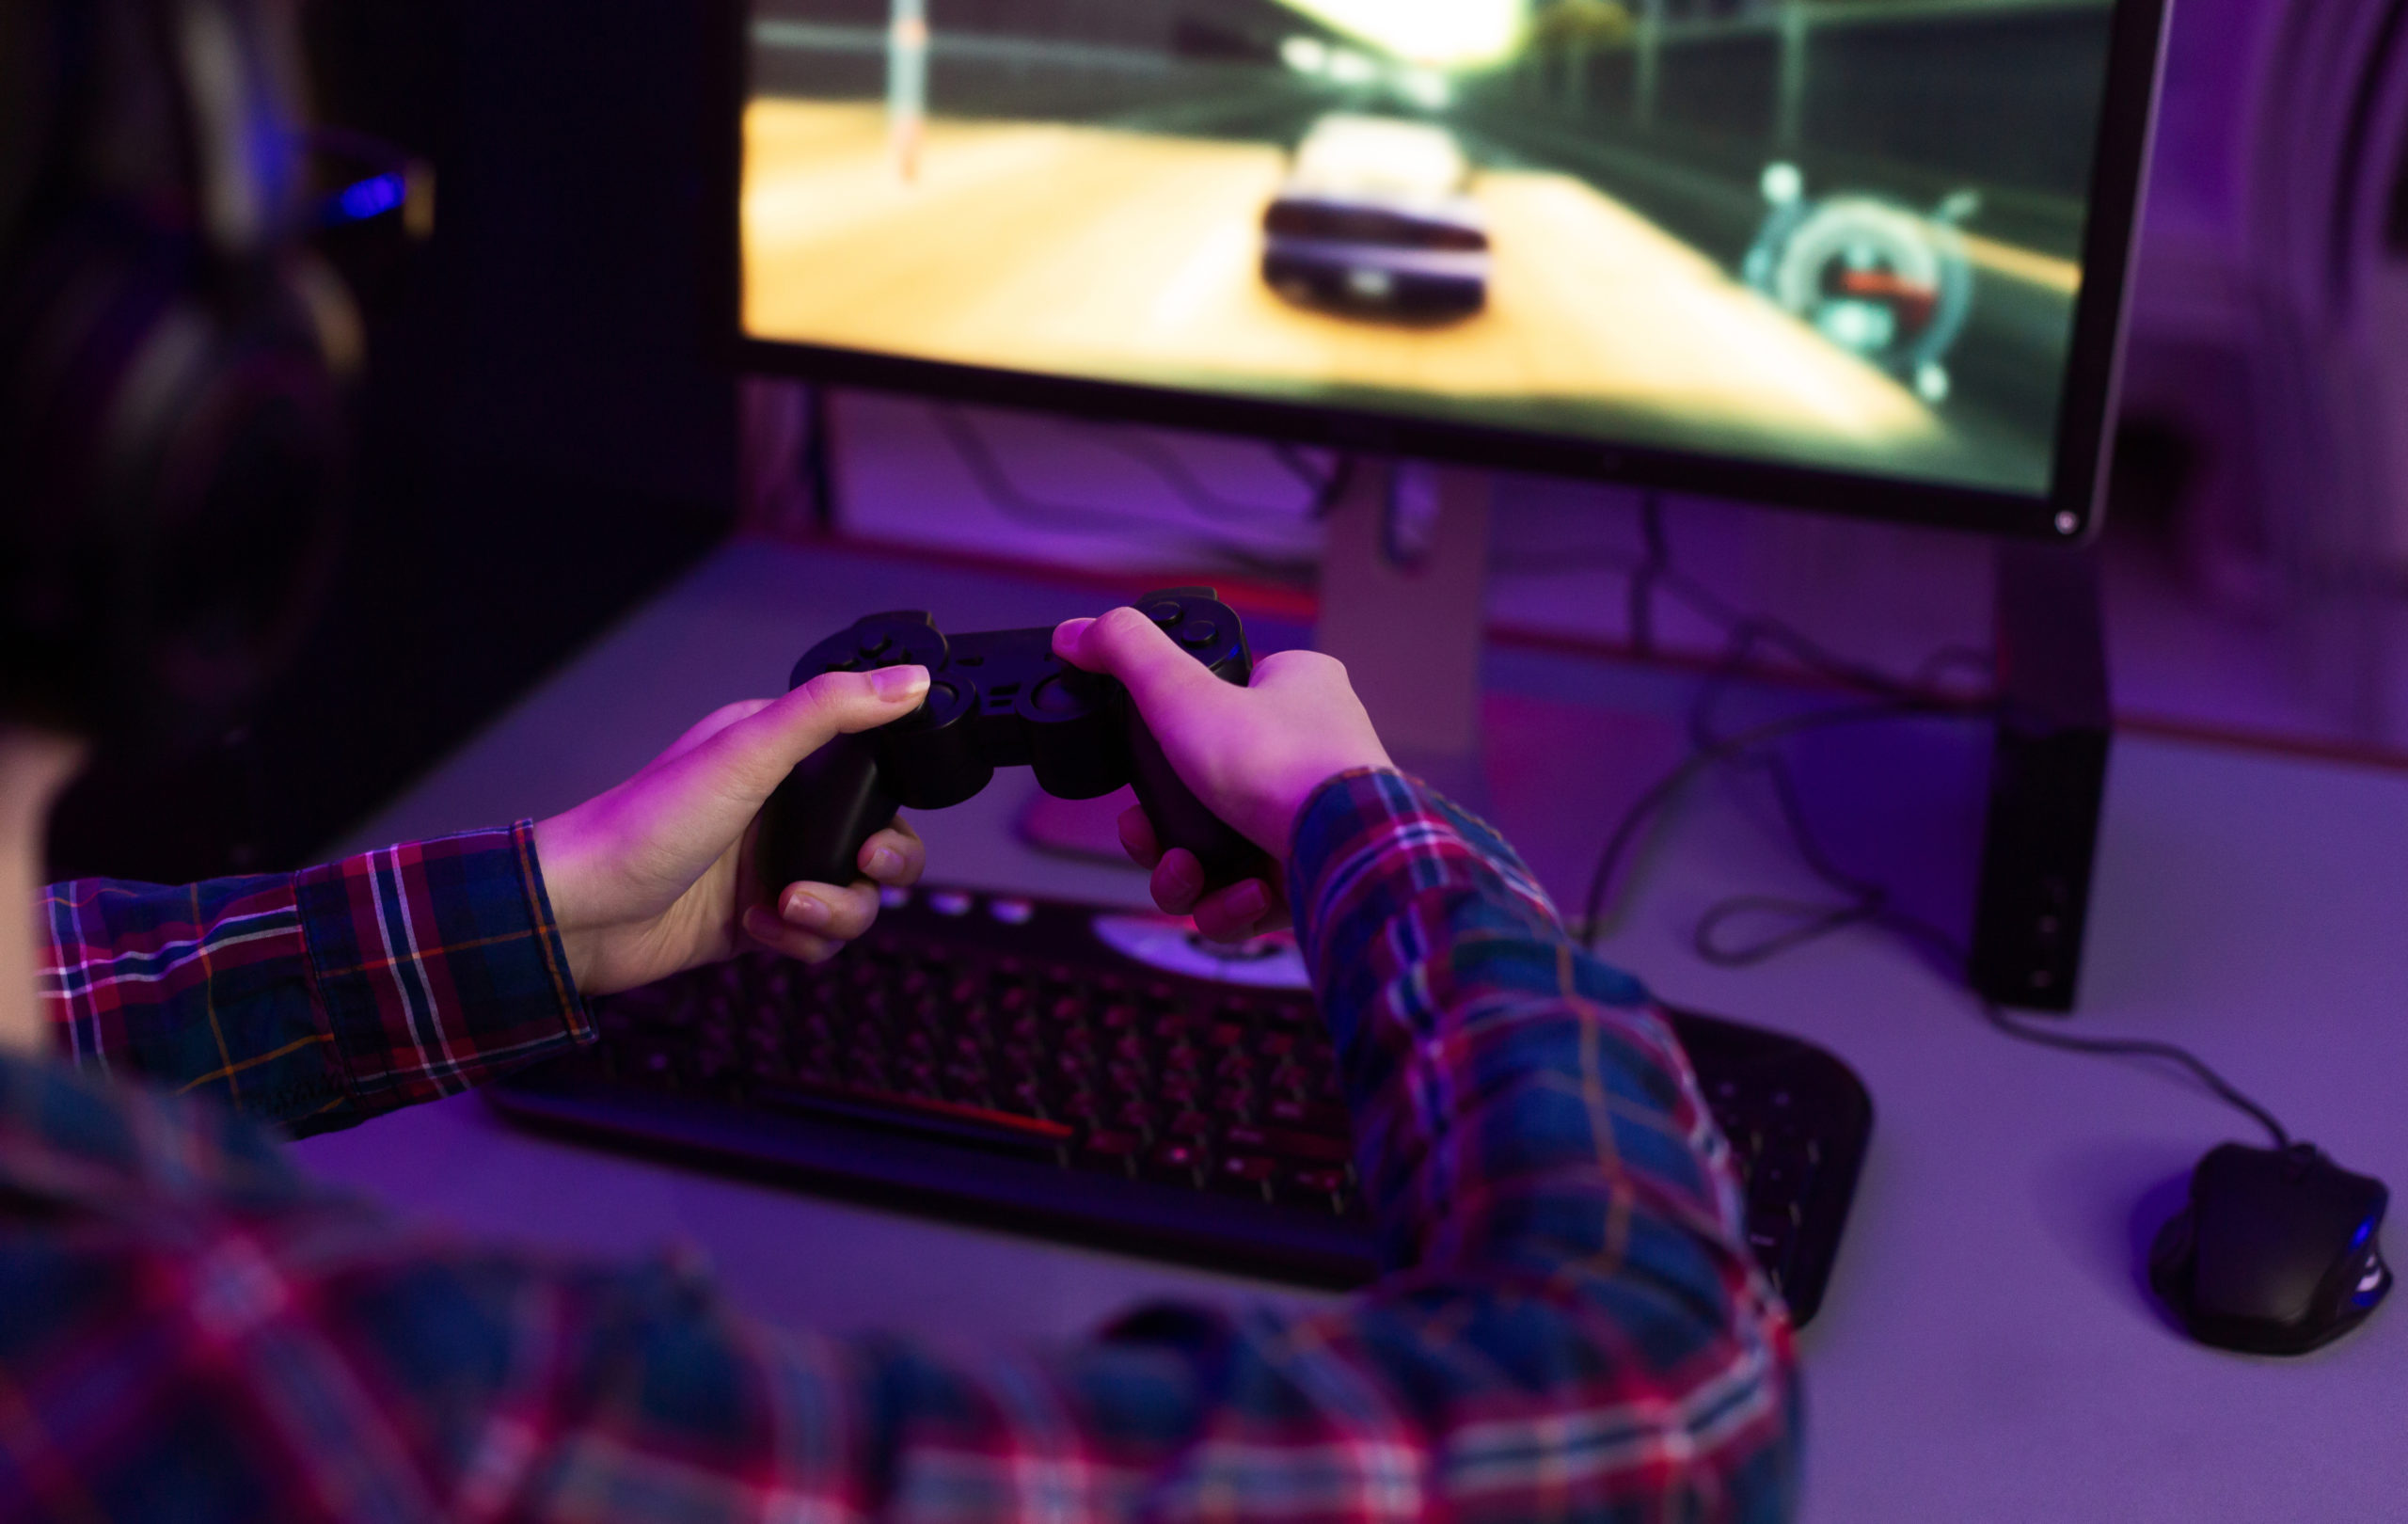 Gamer playing a game with controller in front of screen.